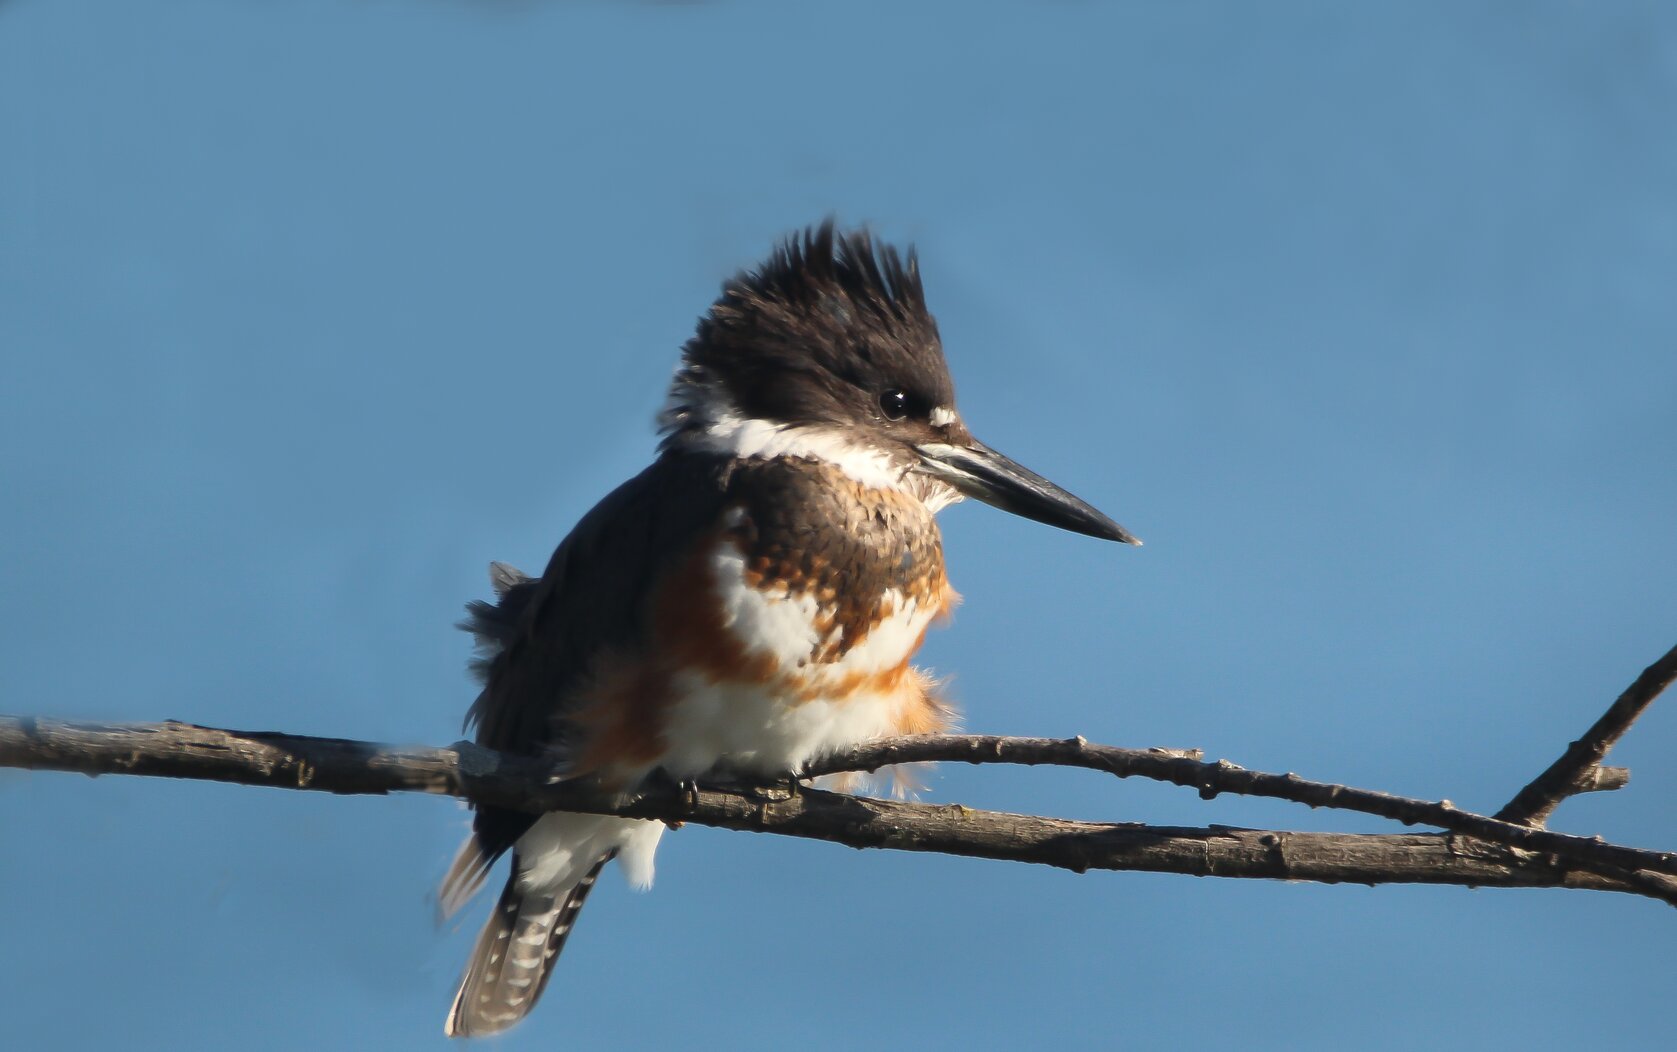 Listen for the rattle of the Belted Kingfisher at Richmond Terrace Park. Photo: <a href="https://www.flickr.com/photos/89780664@N05/" target="_blank">Dave Ostapiuk</a>